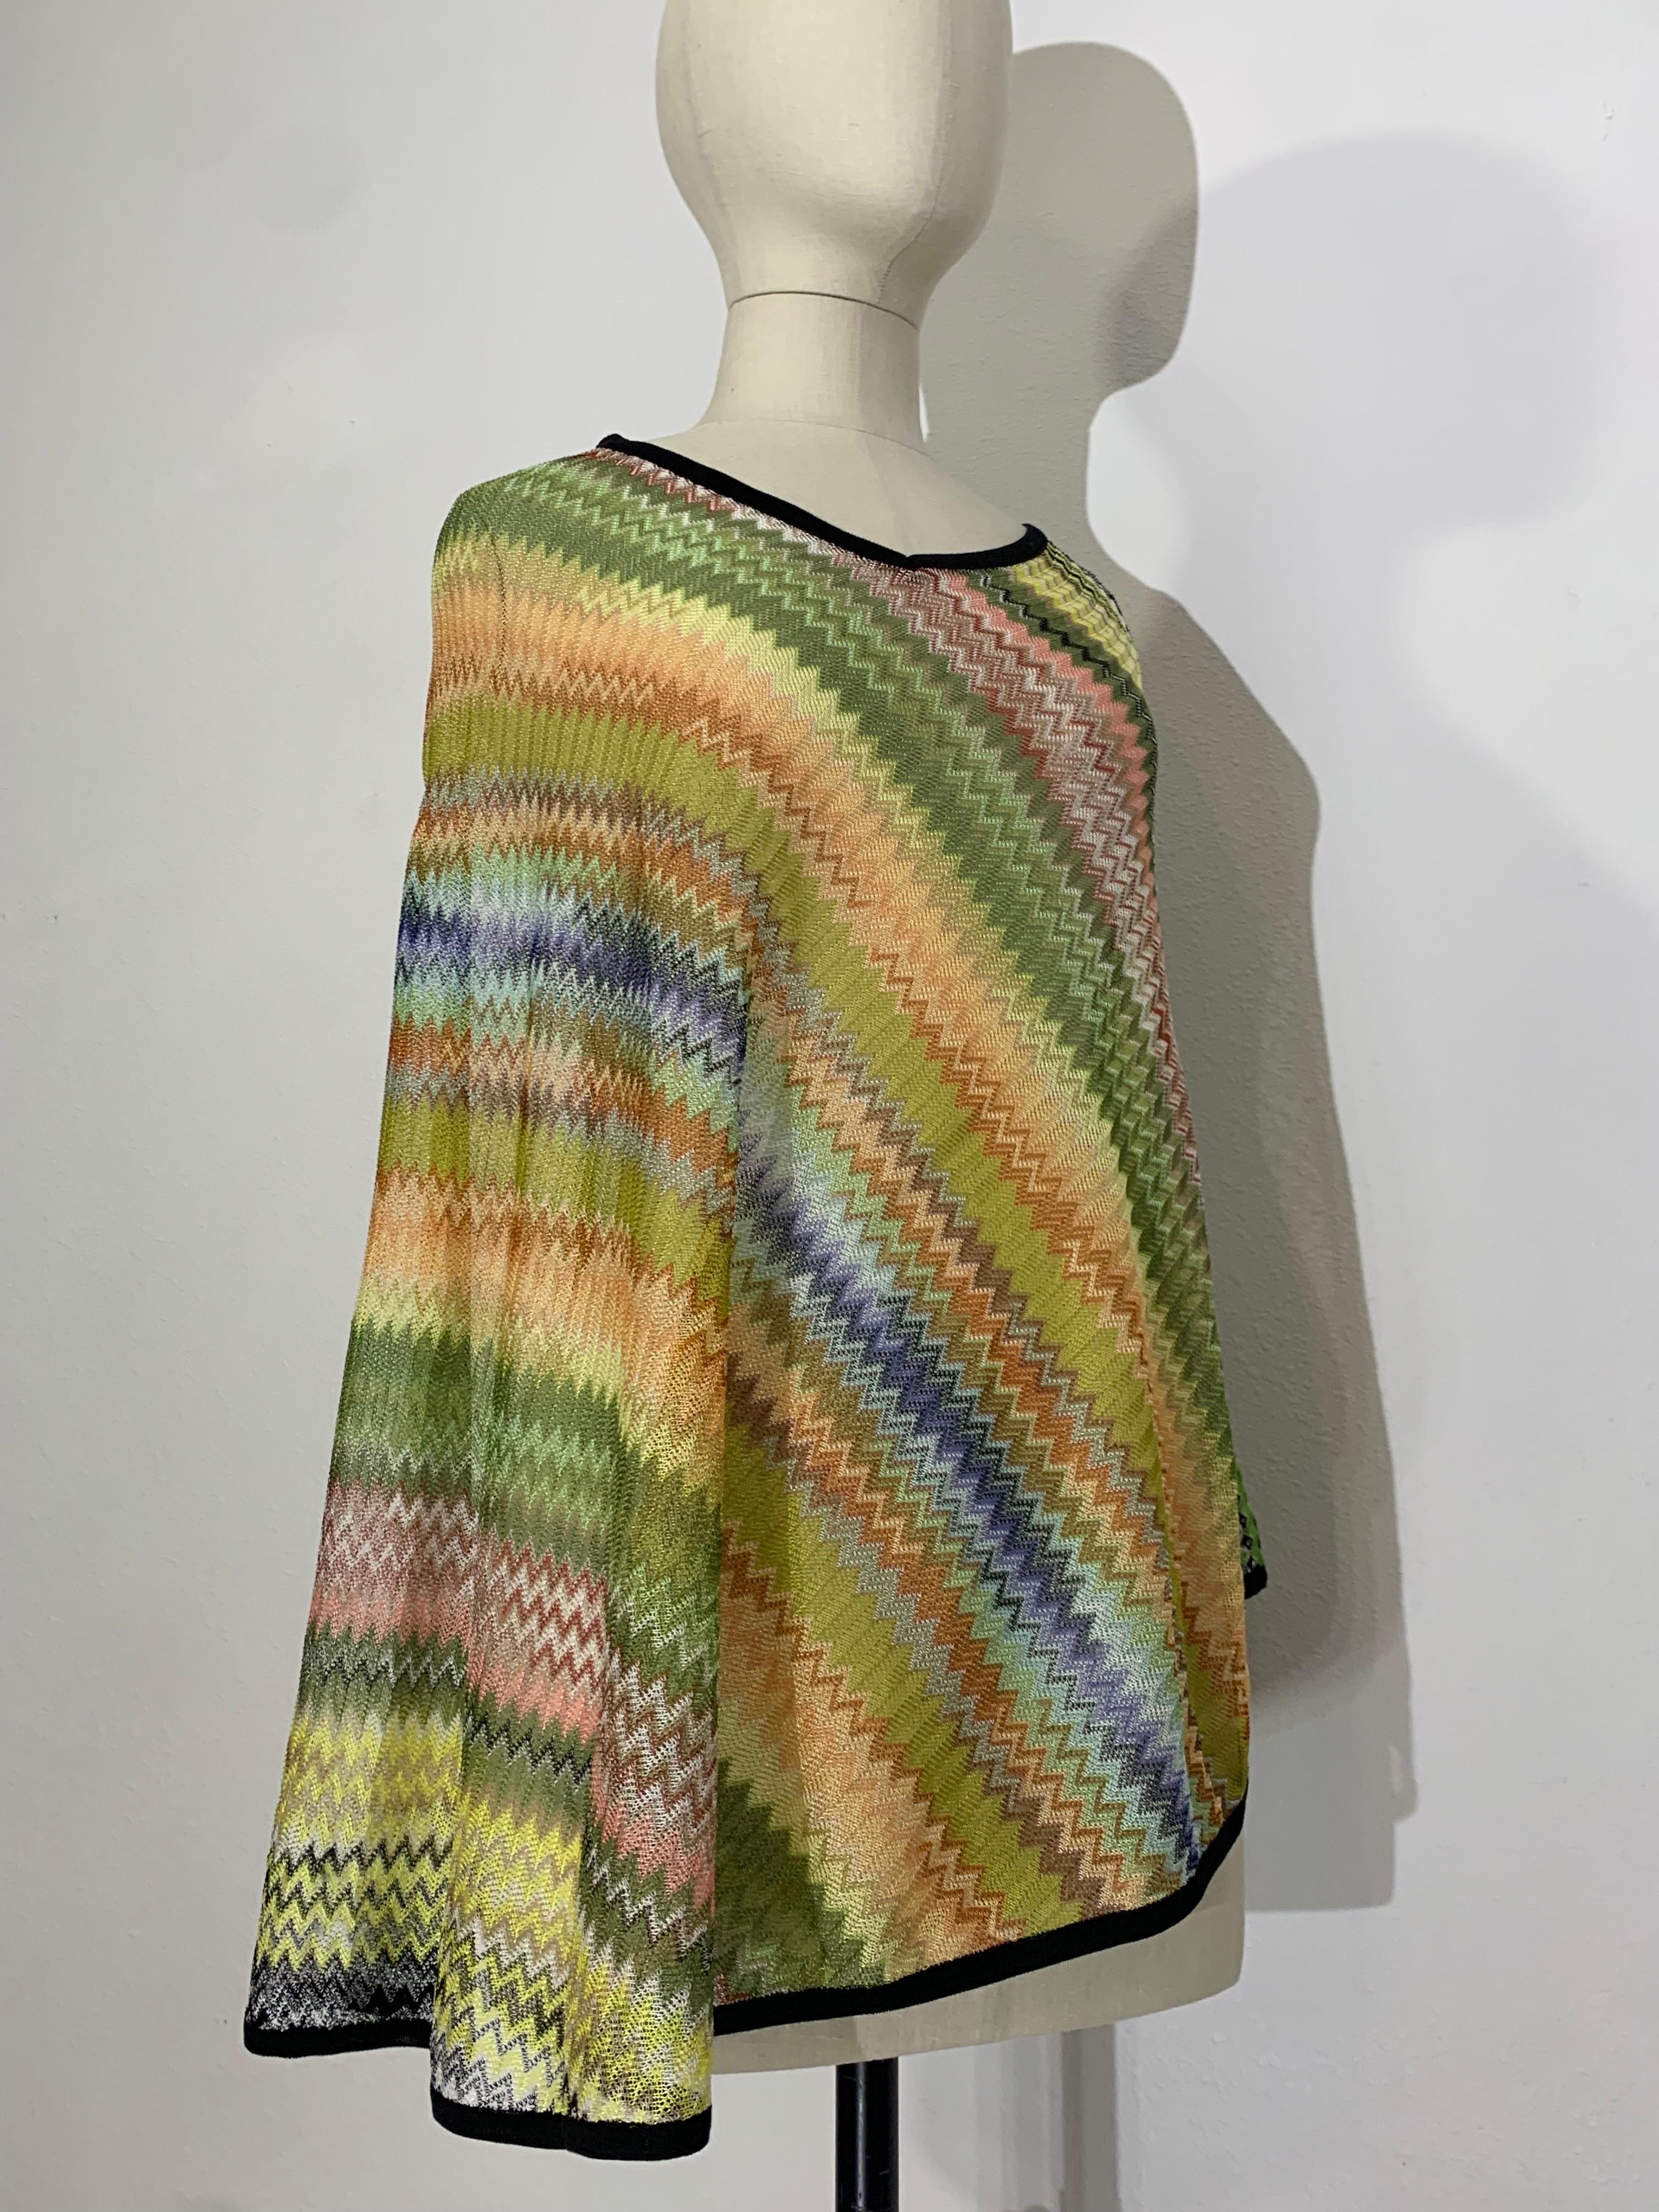 Missoni Spring/Summer Rayon & Cotton Knit Cover-Up in Classic Missoni Zig-Zag For Sale 1